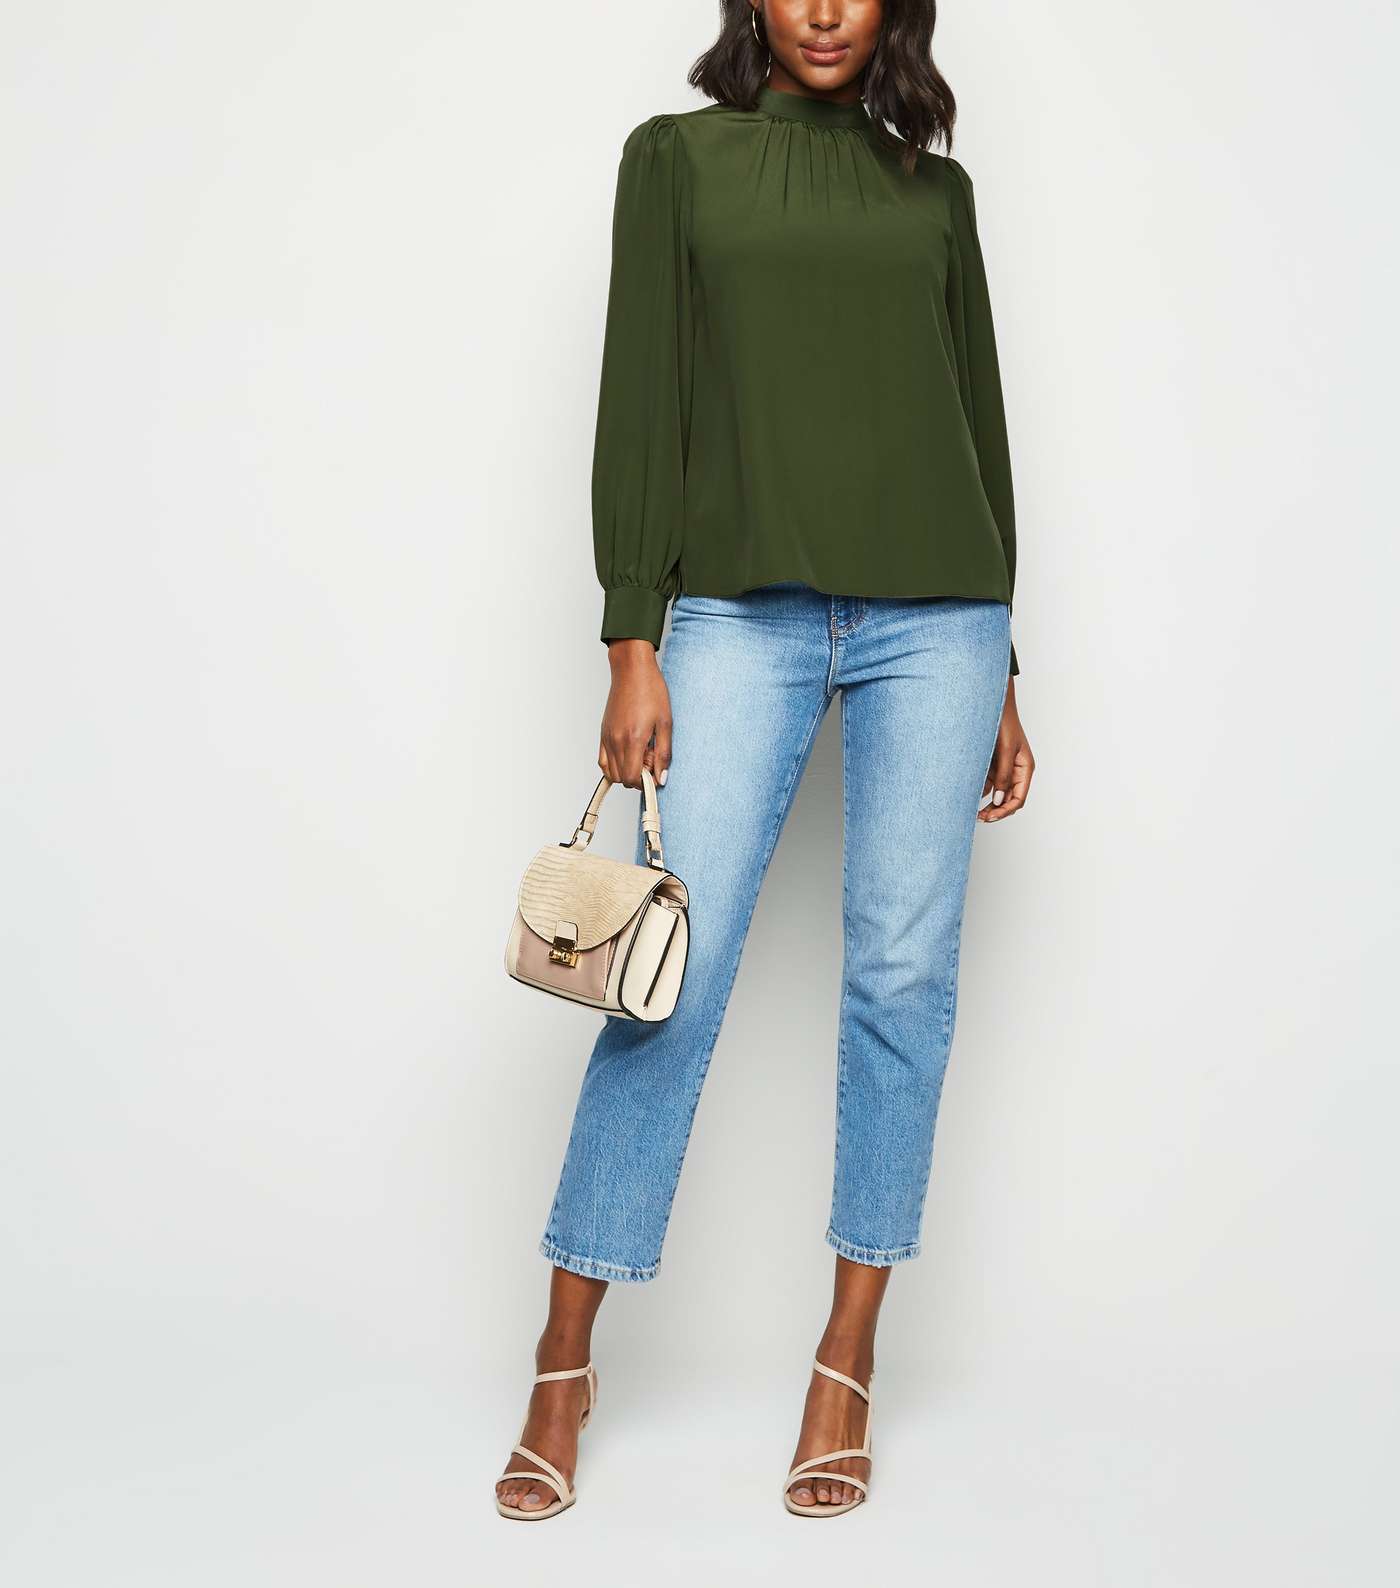 Green High Neck Blouse Image 2